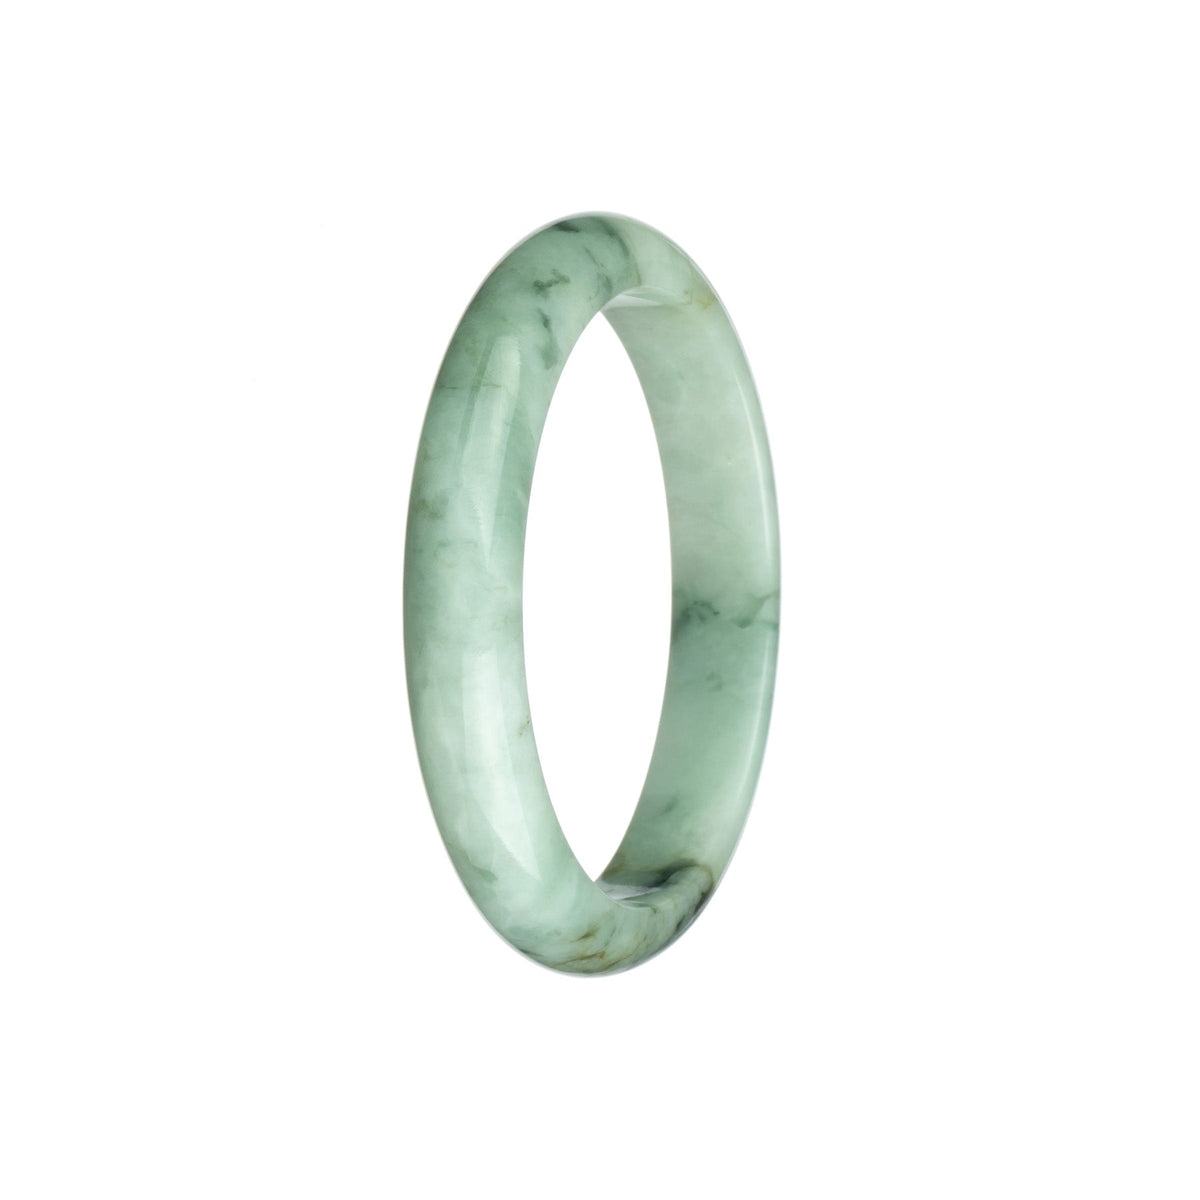 Certified Untreated White with Pattern Jade Bangle Bracelet - 58mm Half Moon